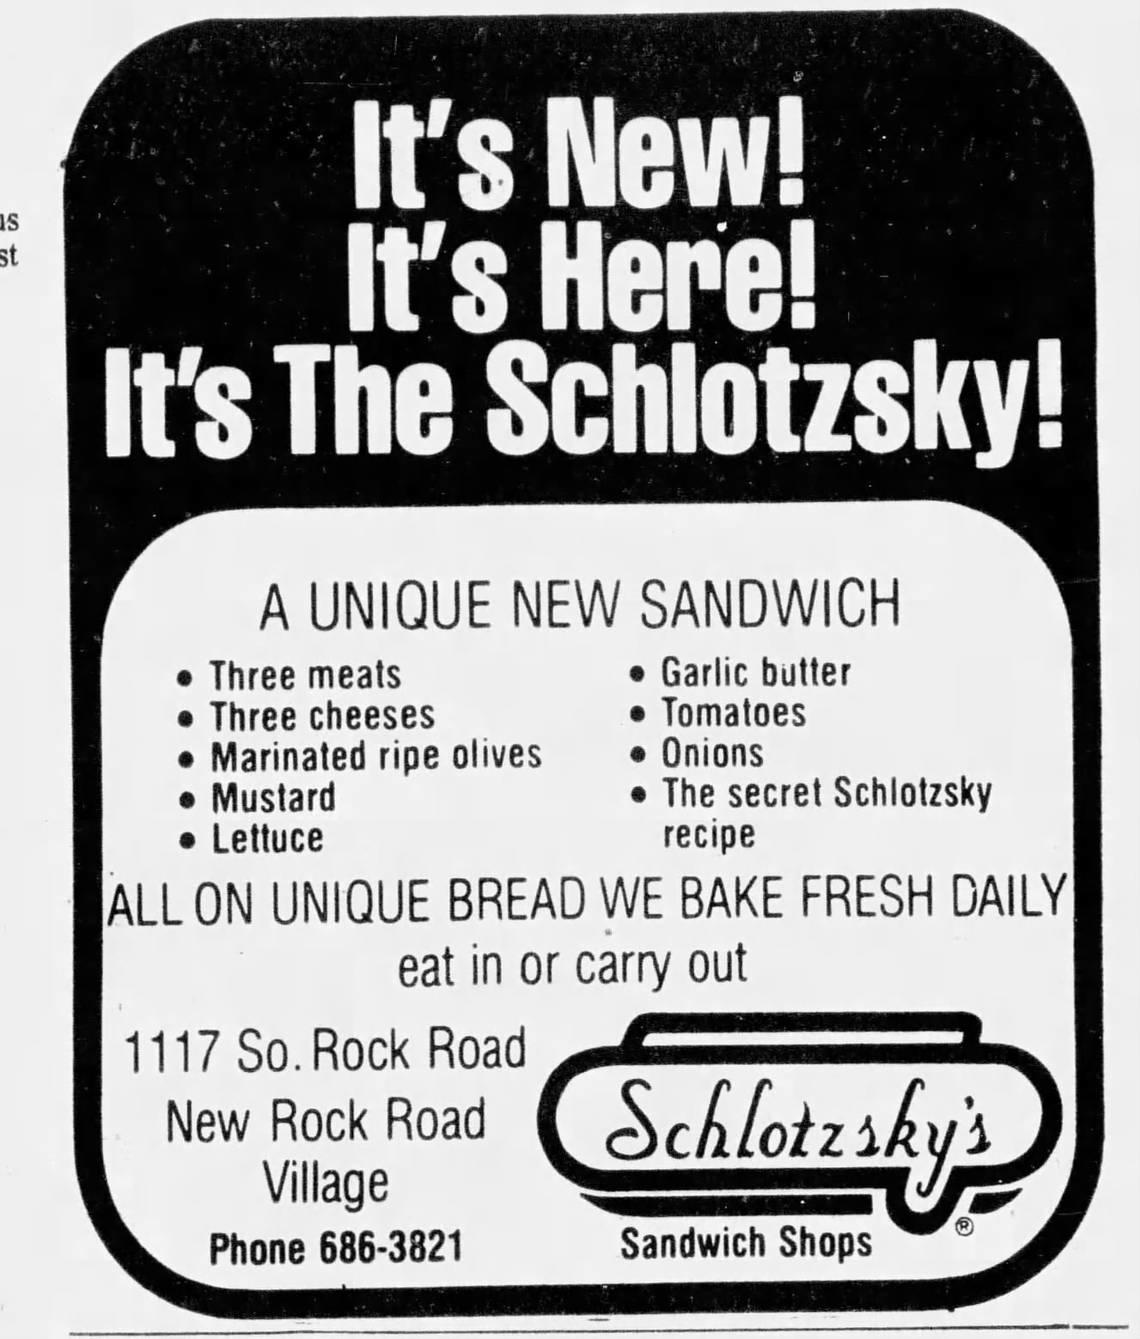 An advertisement that ran in the Wichita Eagle in 1978 announced the opening of Wichita’s first Schlotzsky’s.